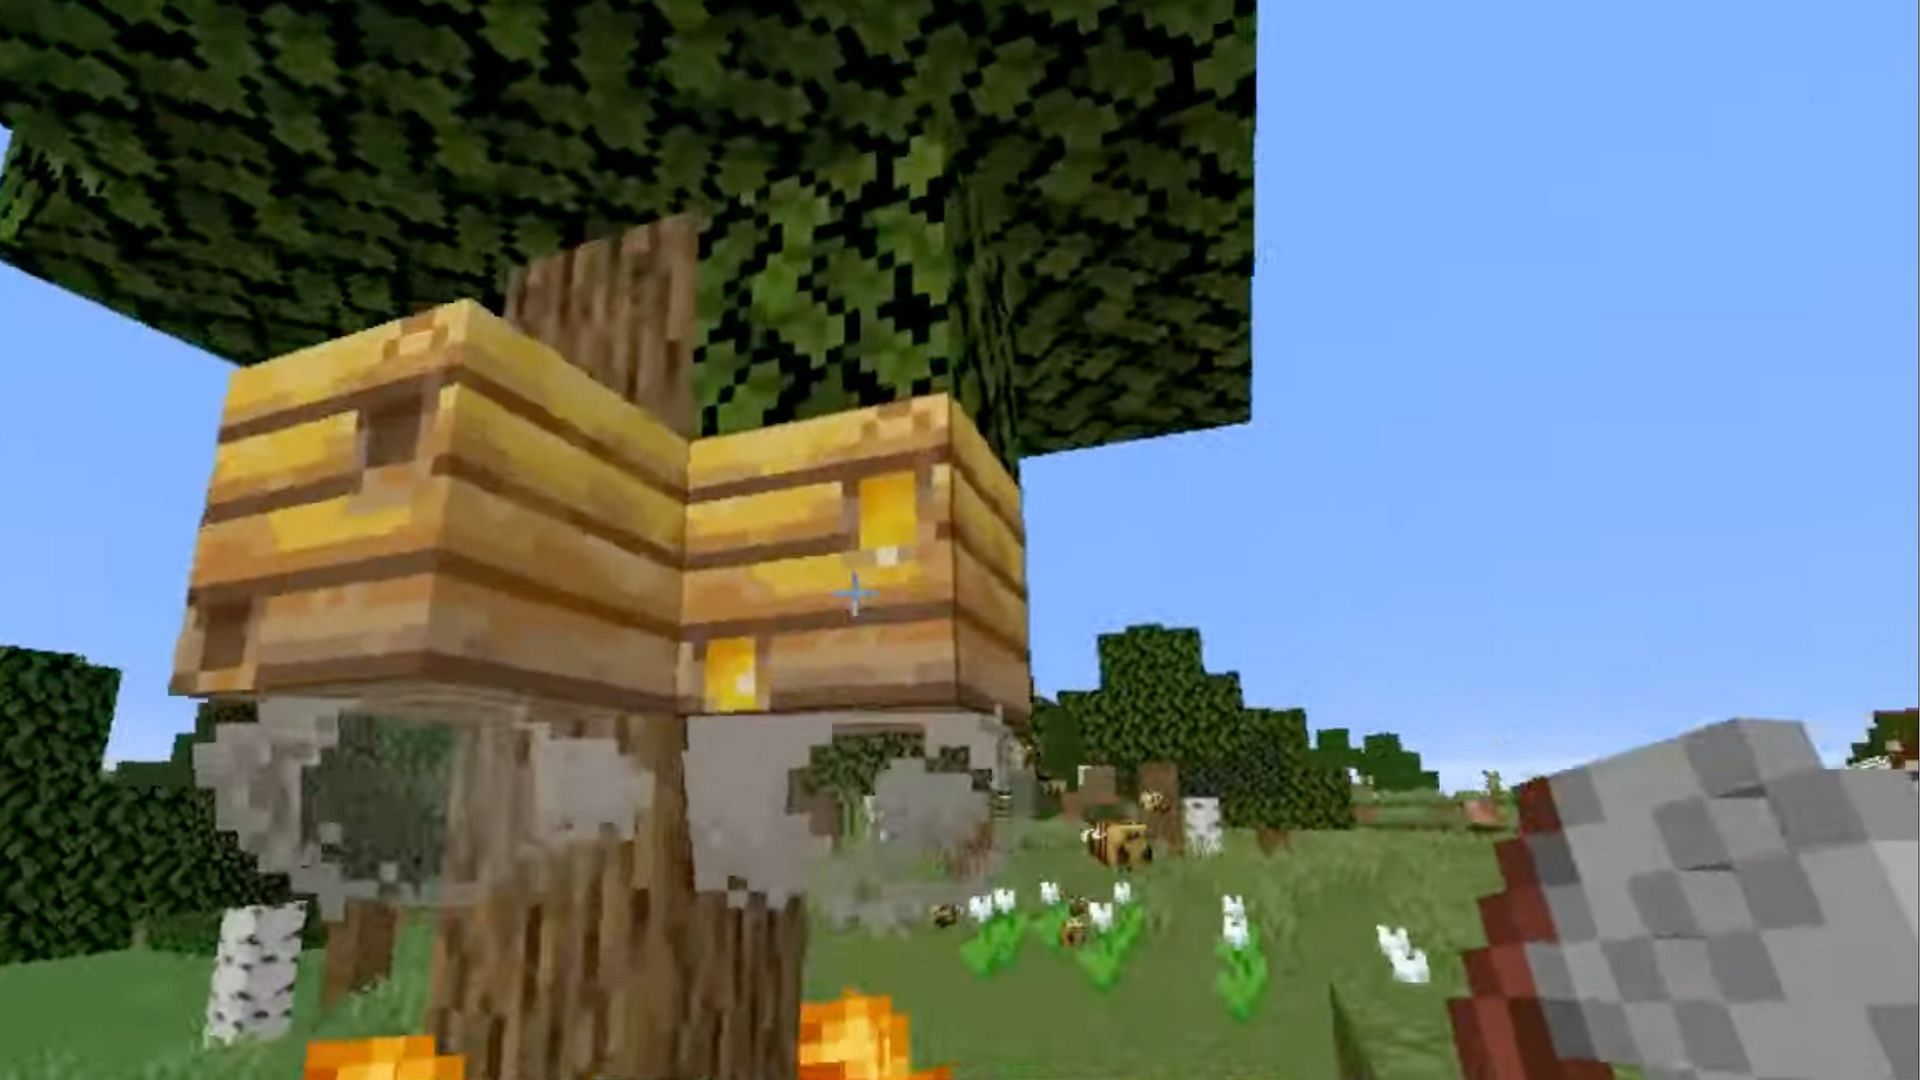 Shears can be used on the beehive to get honeycomb. (Image via YouTube/MonkeyKingHero)